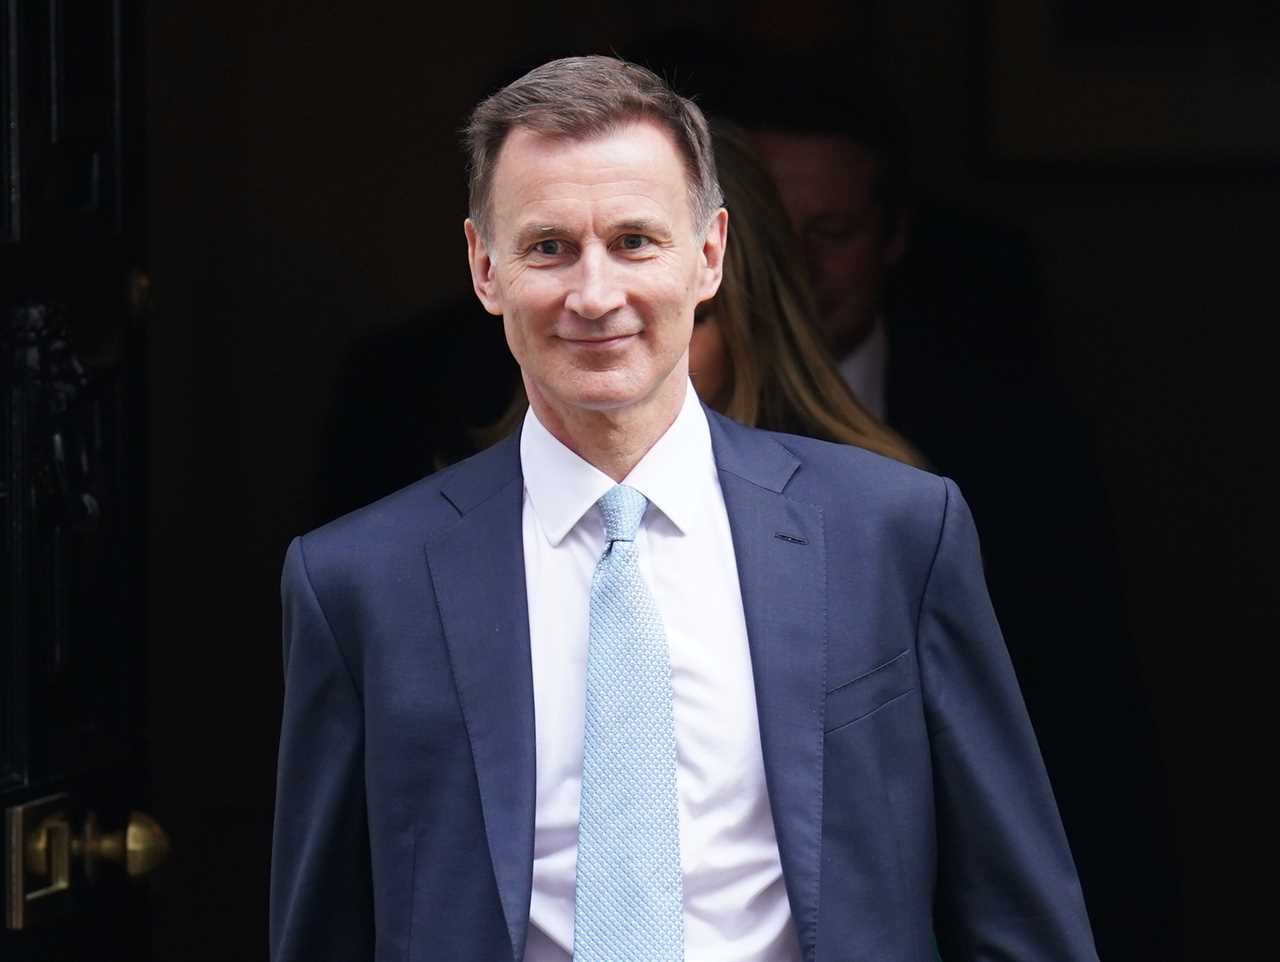 Labour Campaign Confusion Grows as Starmer Faces Criticism from Jeremy Hunt